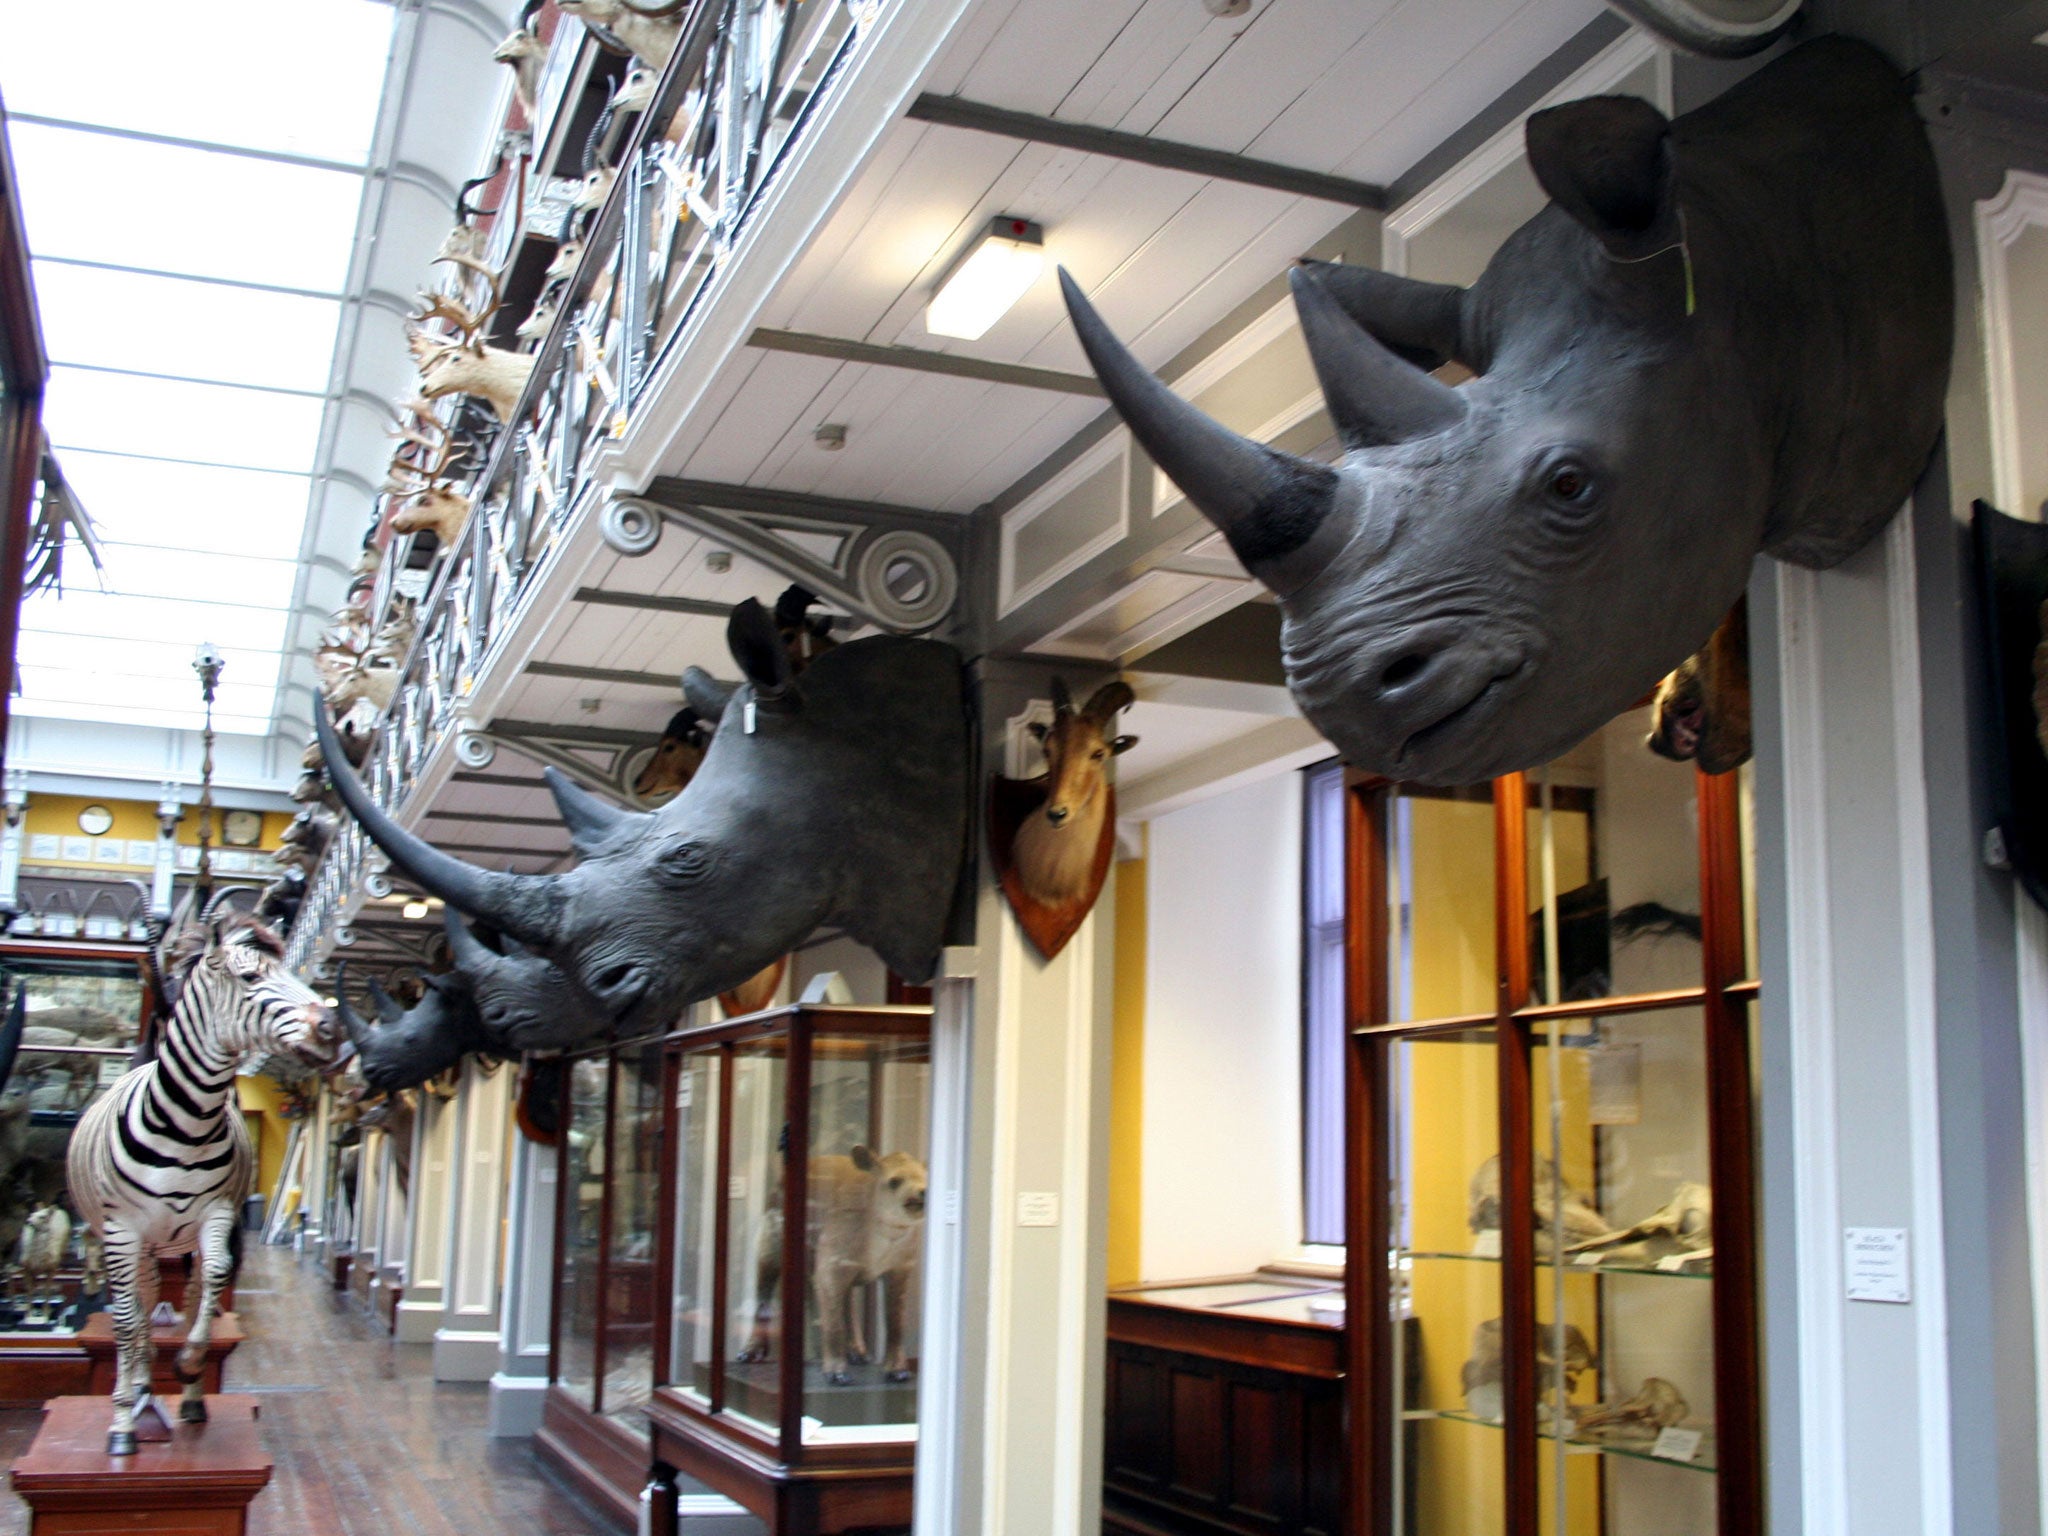 The four rhinoceros heads, worth about £428,000 each, have been stolen from museum storage in Ireland